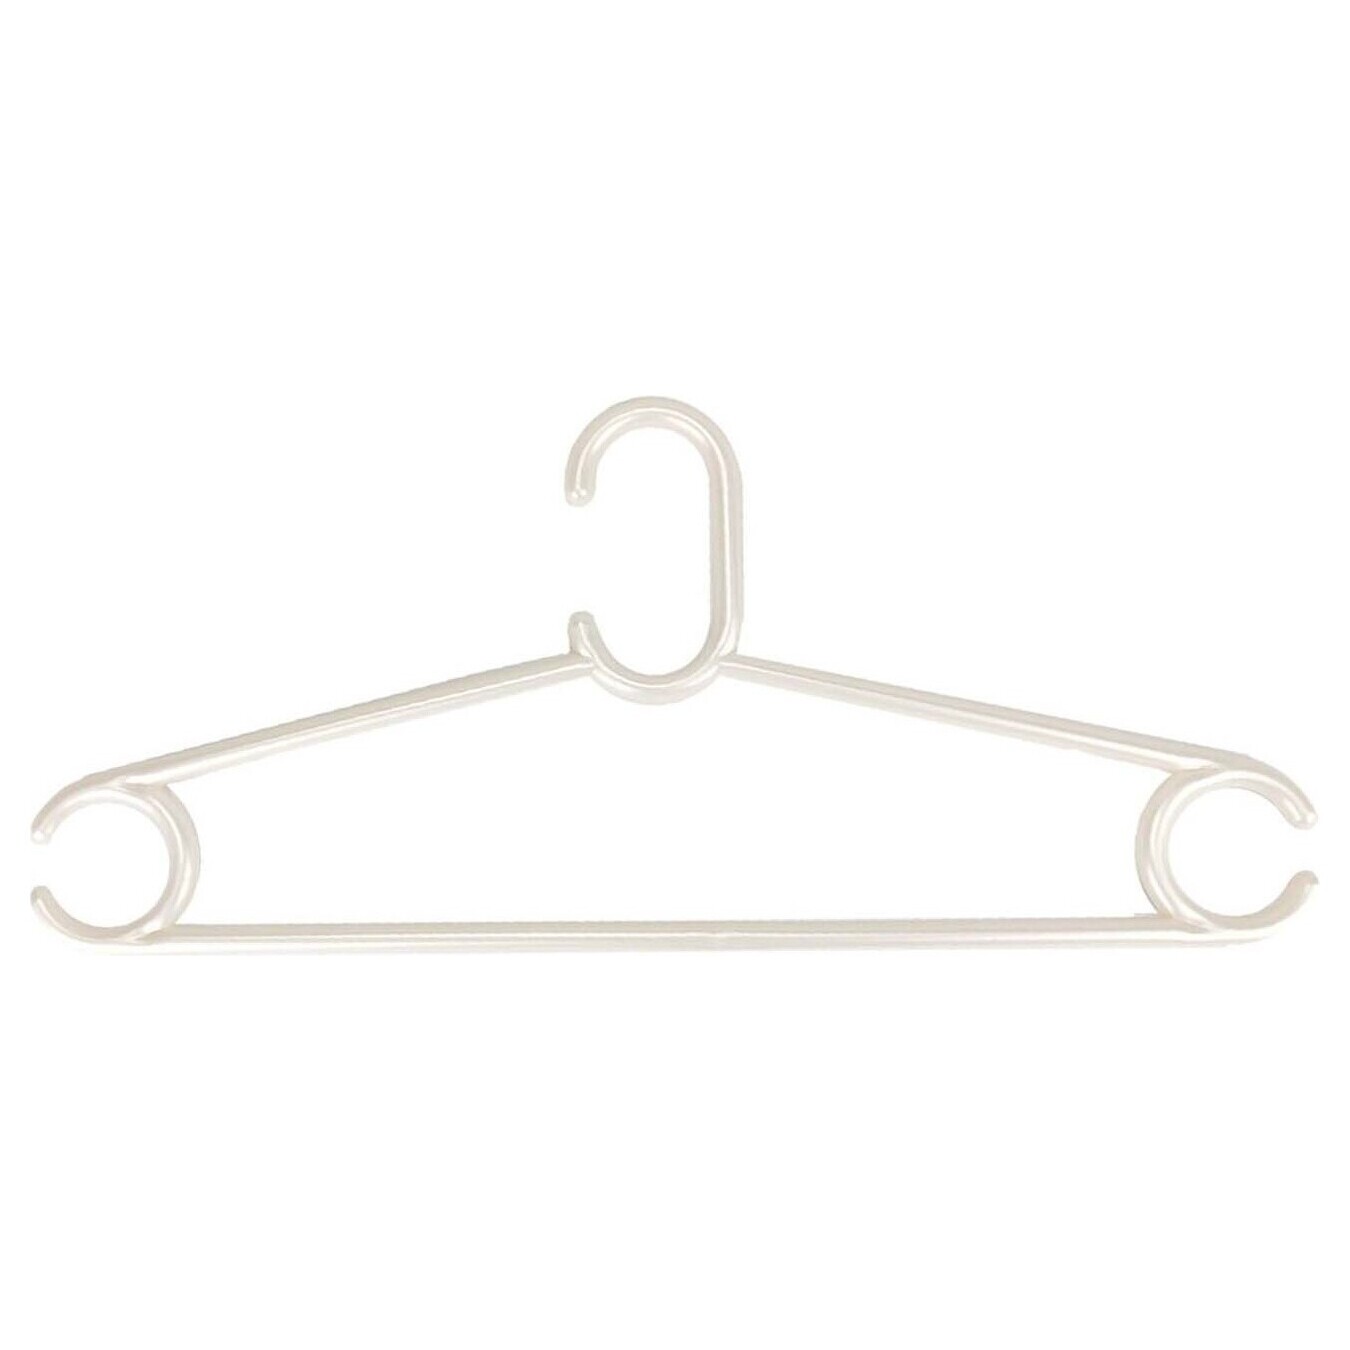 Hanger for mother-of-pearl clothes 38-40, 44-46 years old.